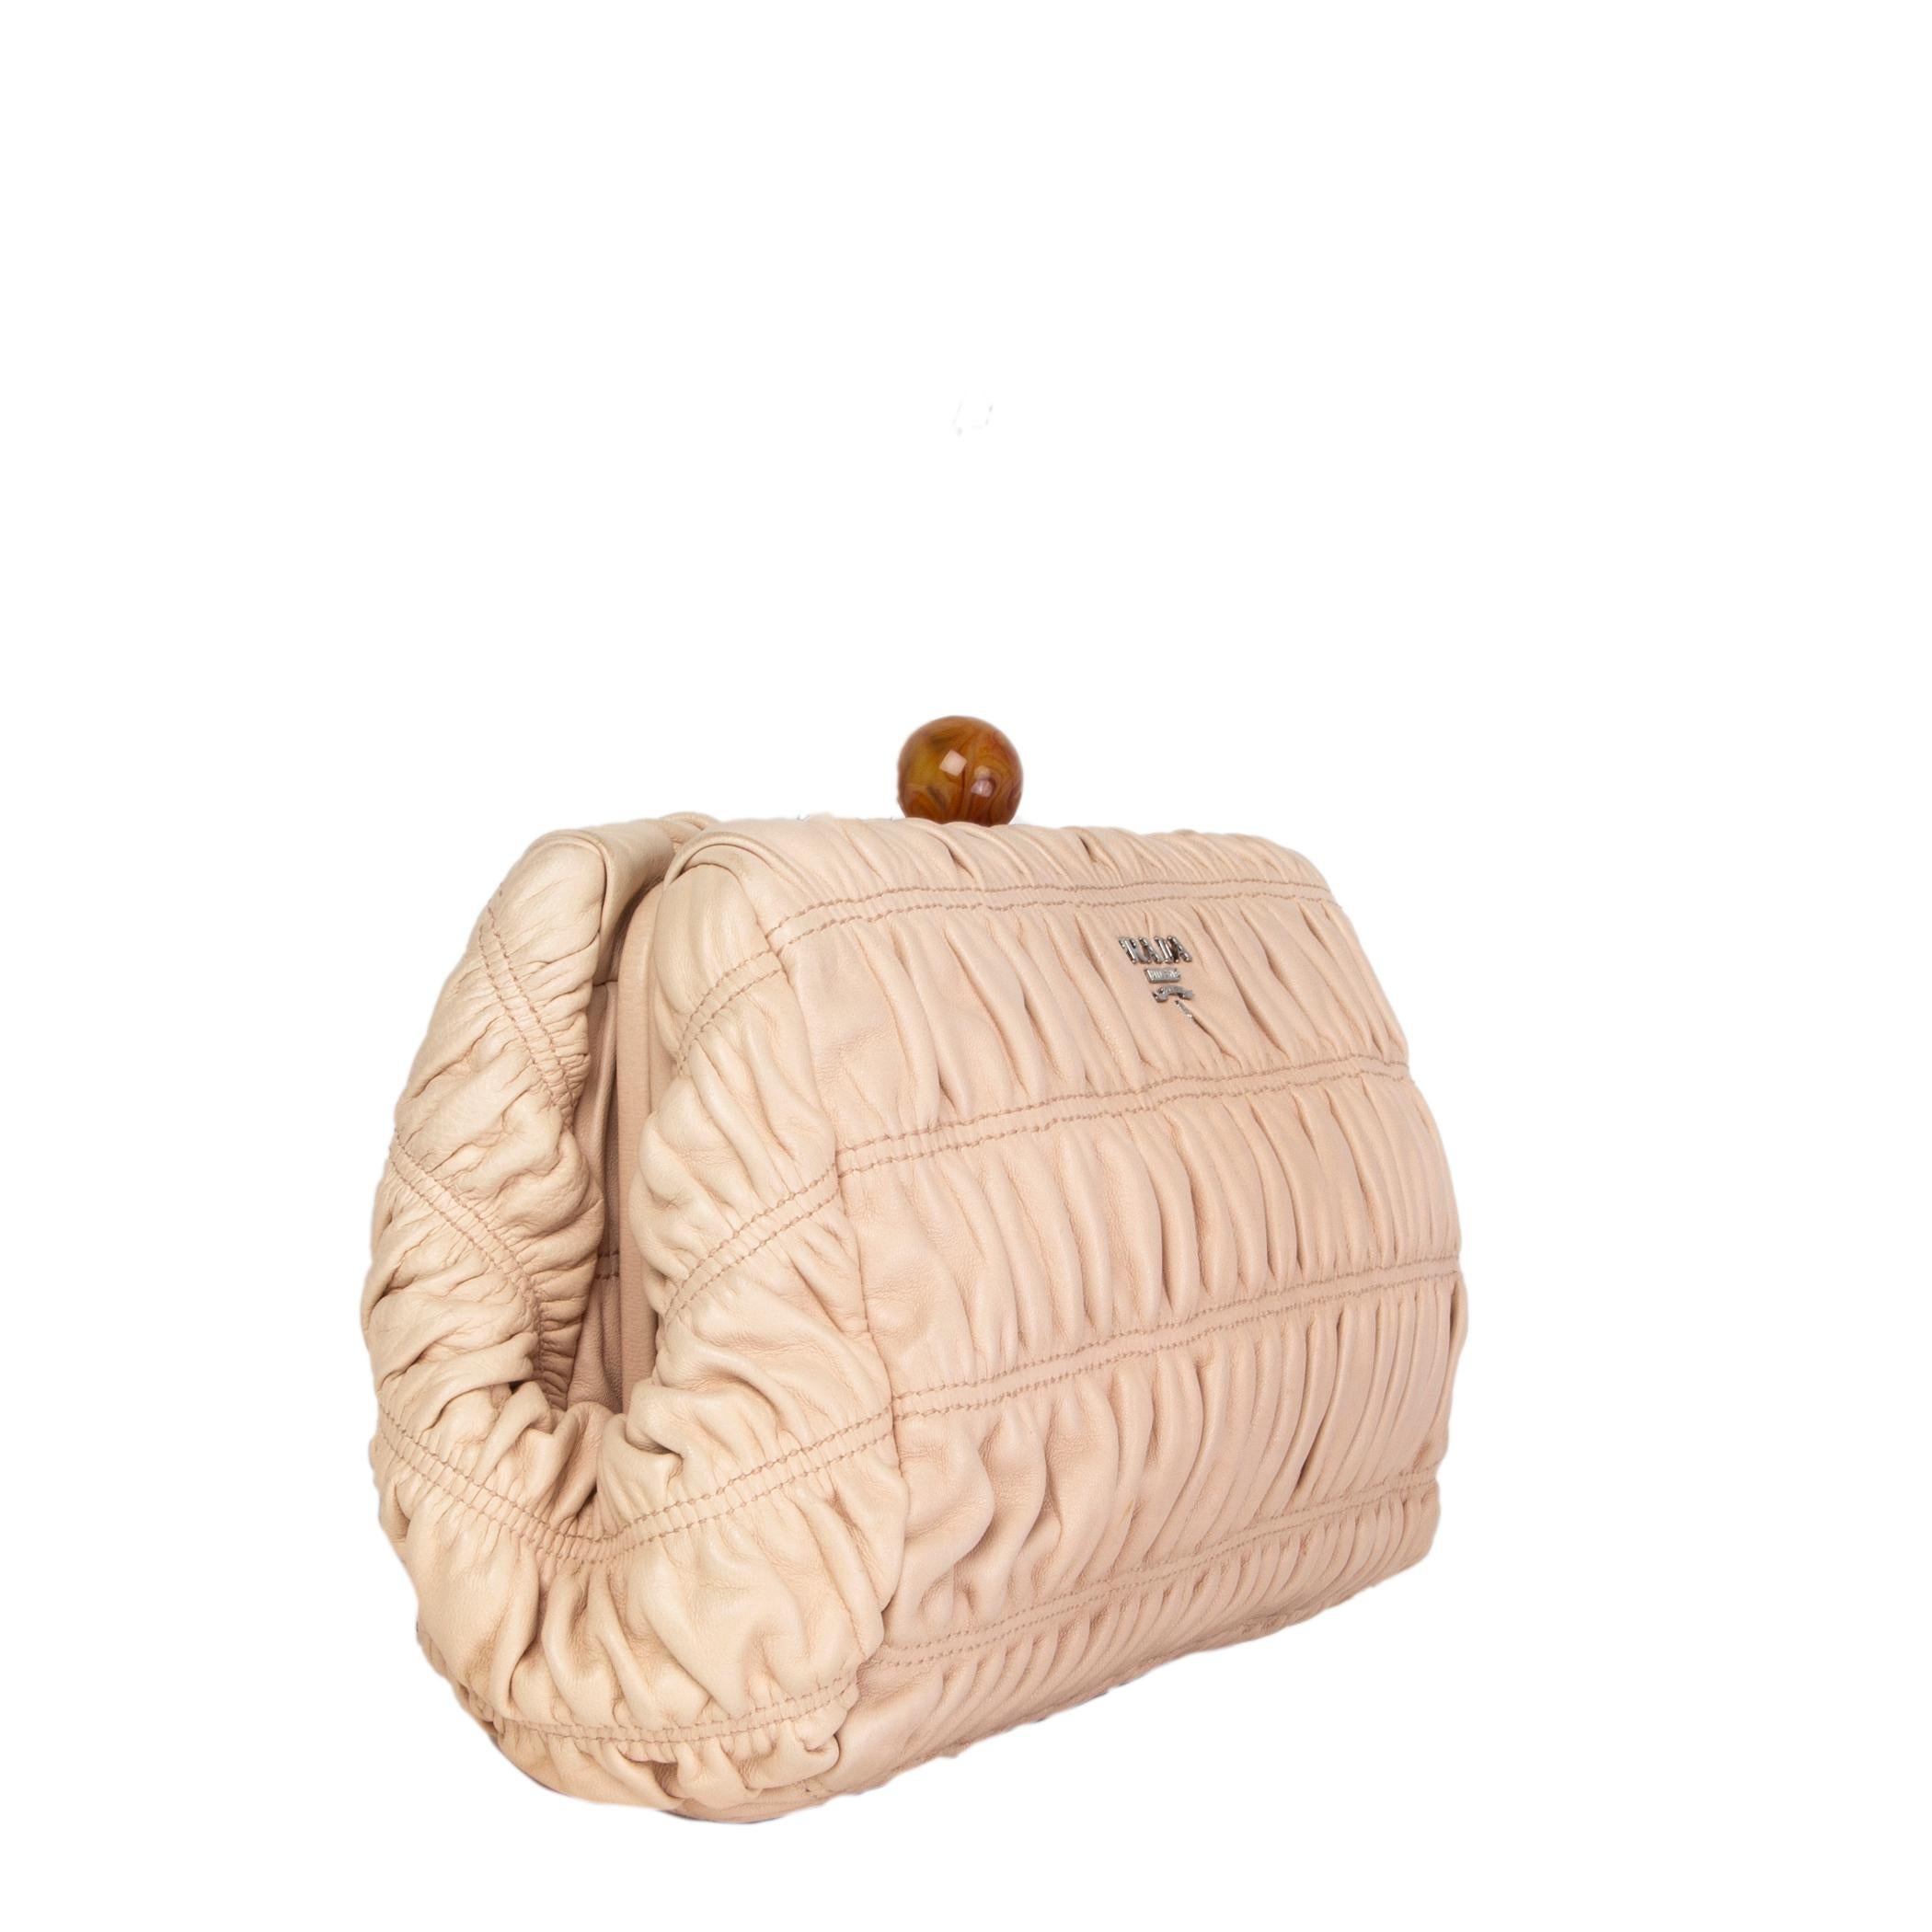 Prada frame clutch in Cipria (dust rose) Gaufre ruched leather. Cognac and caramel colored resin marble ball closure. Lined in dusty rose lambskin leather with an open pocket against the front and an open and zipper pocket against the back. Has been